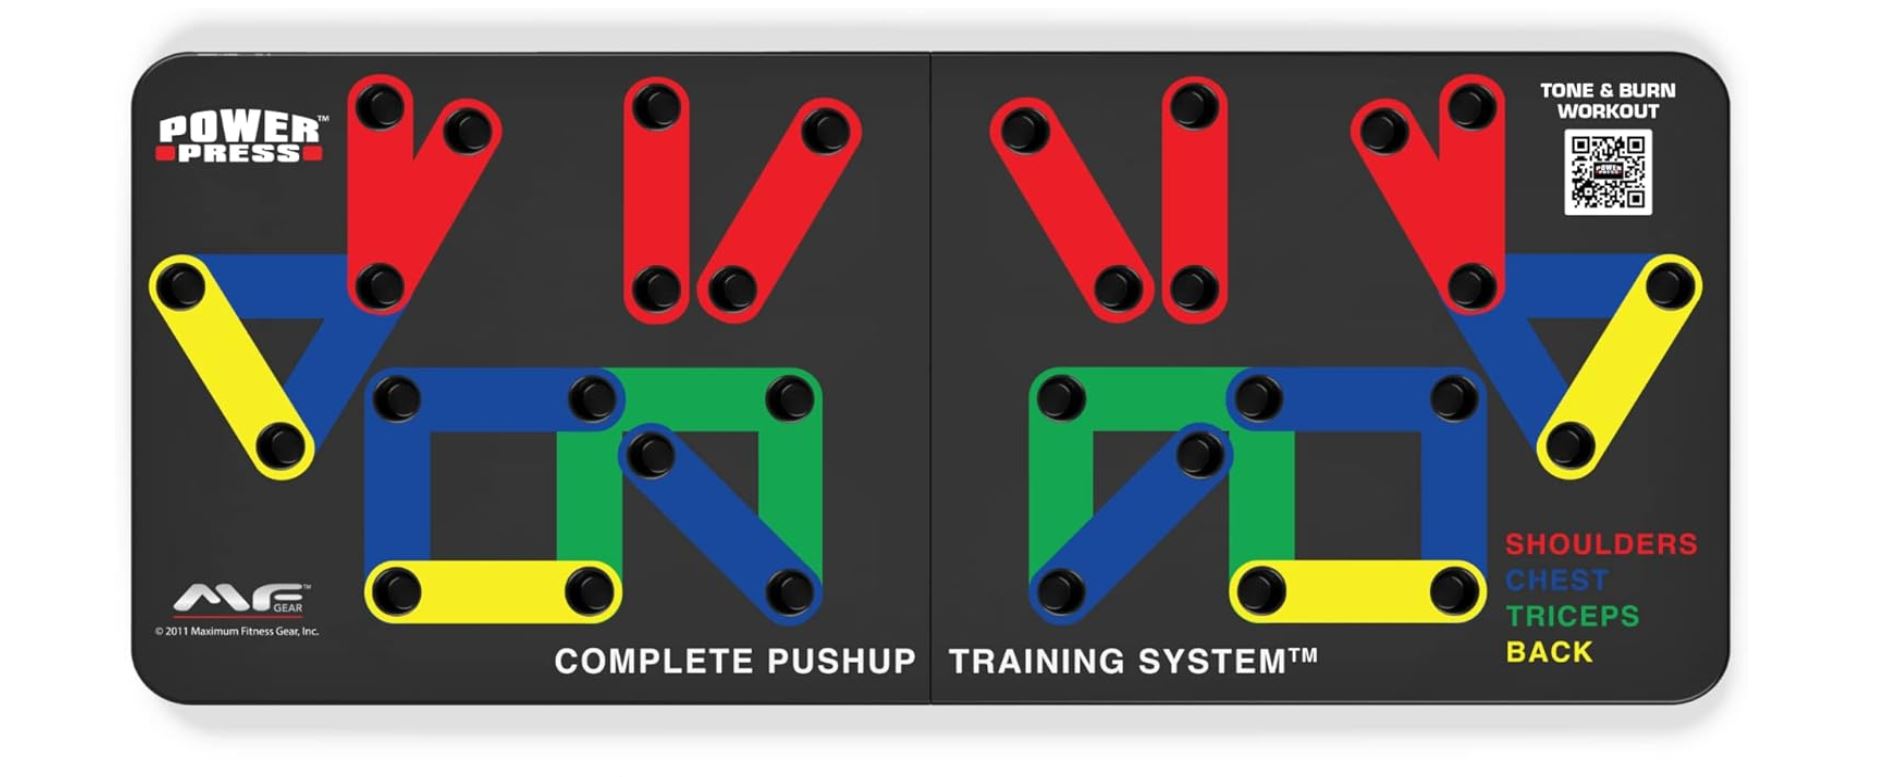 Power Press Push Up Board Review